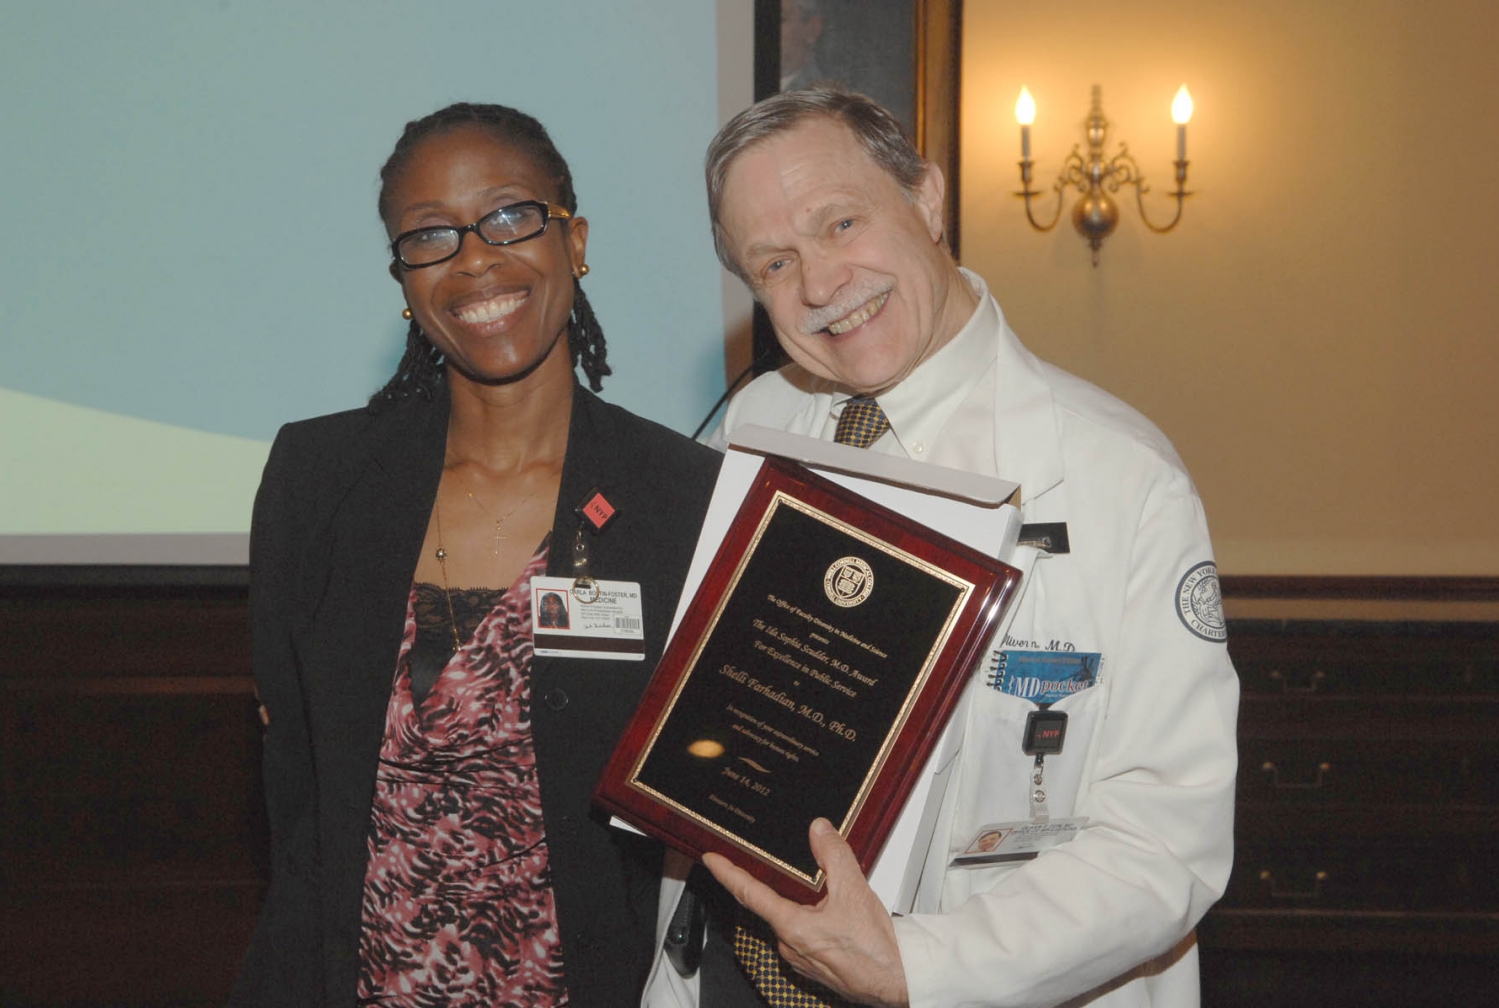 Dr. Oliver Fein accepts the Ida Sophia Scudder, M.D. Student Award for Excellence in Public Service from Dr. Carla Boutin-Foster on behalf of Dr. Shelli Farhadian Photo credit: Jason Green